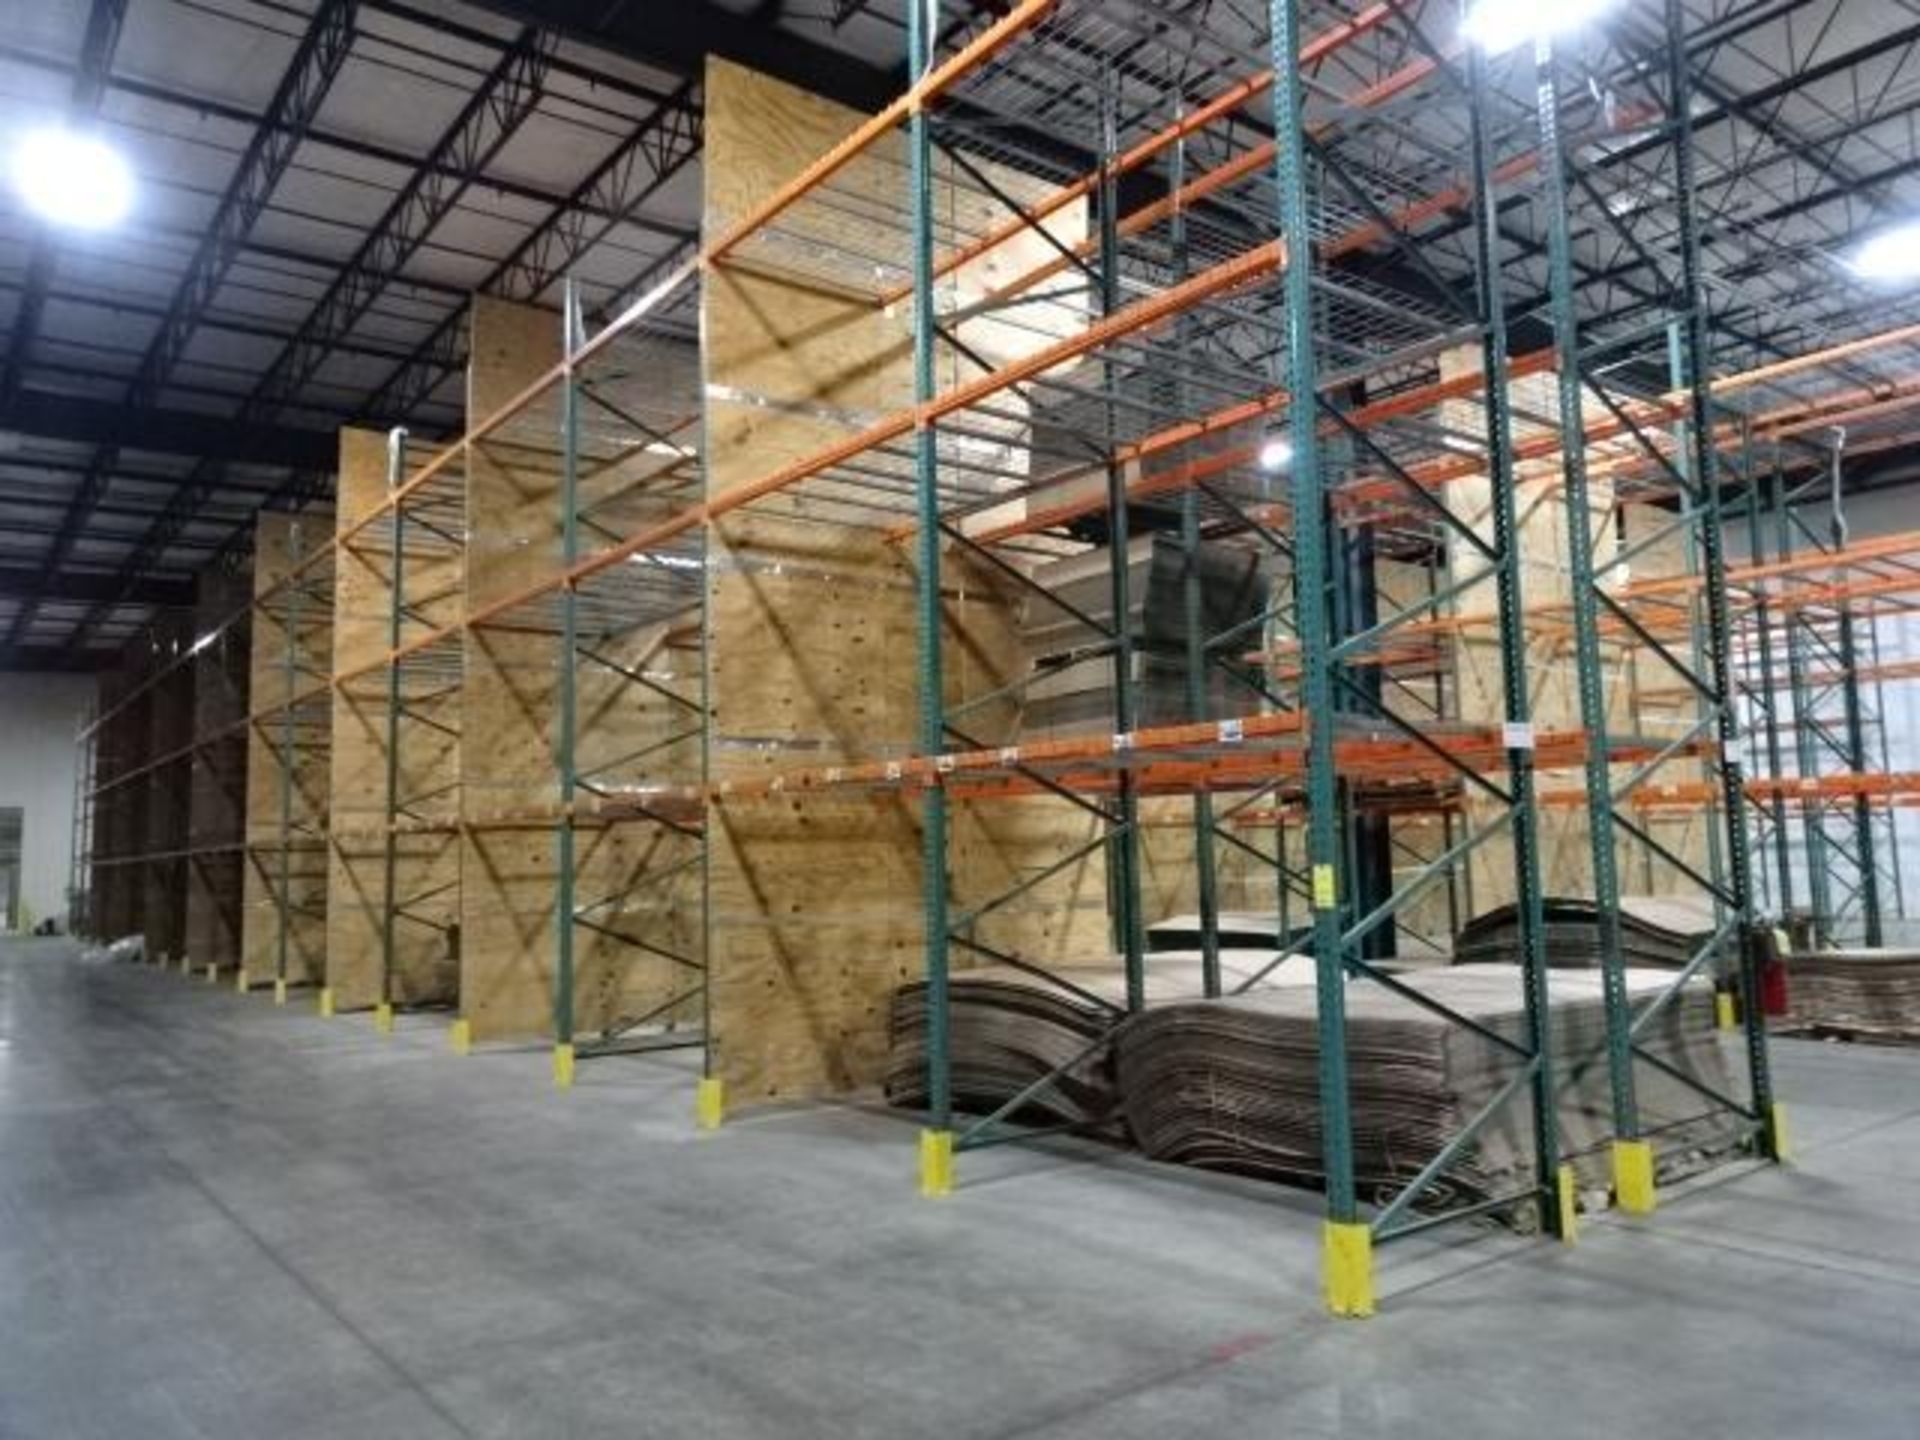 LOT: (40) Bays Heavy Duty Pallet Racking Consisting of: (42) 14' Uprights, (240) 8' Cross Beams, and - Image 2 of 2